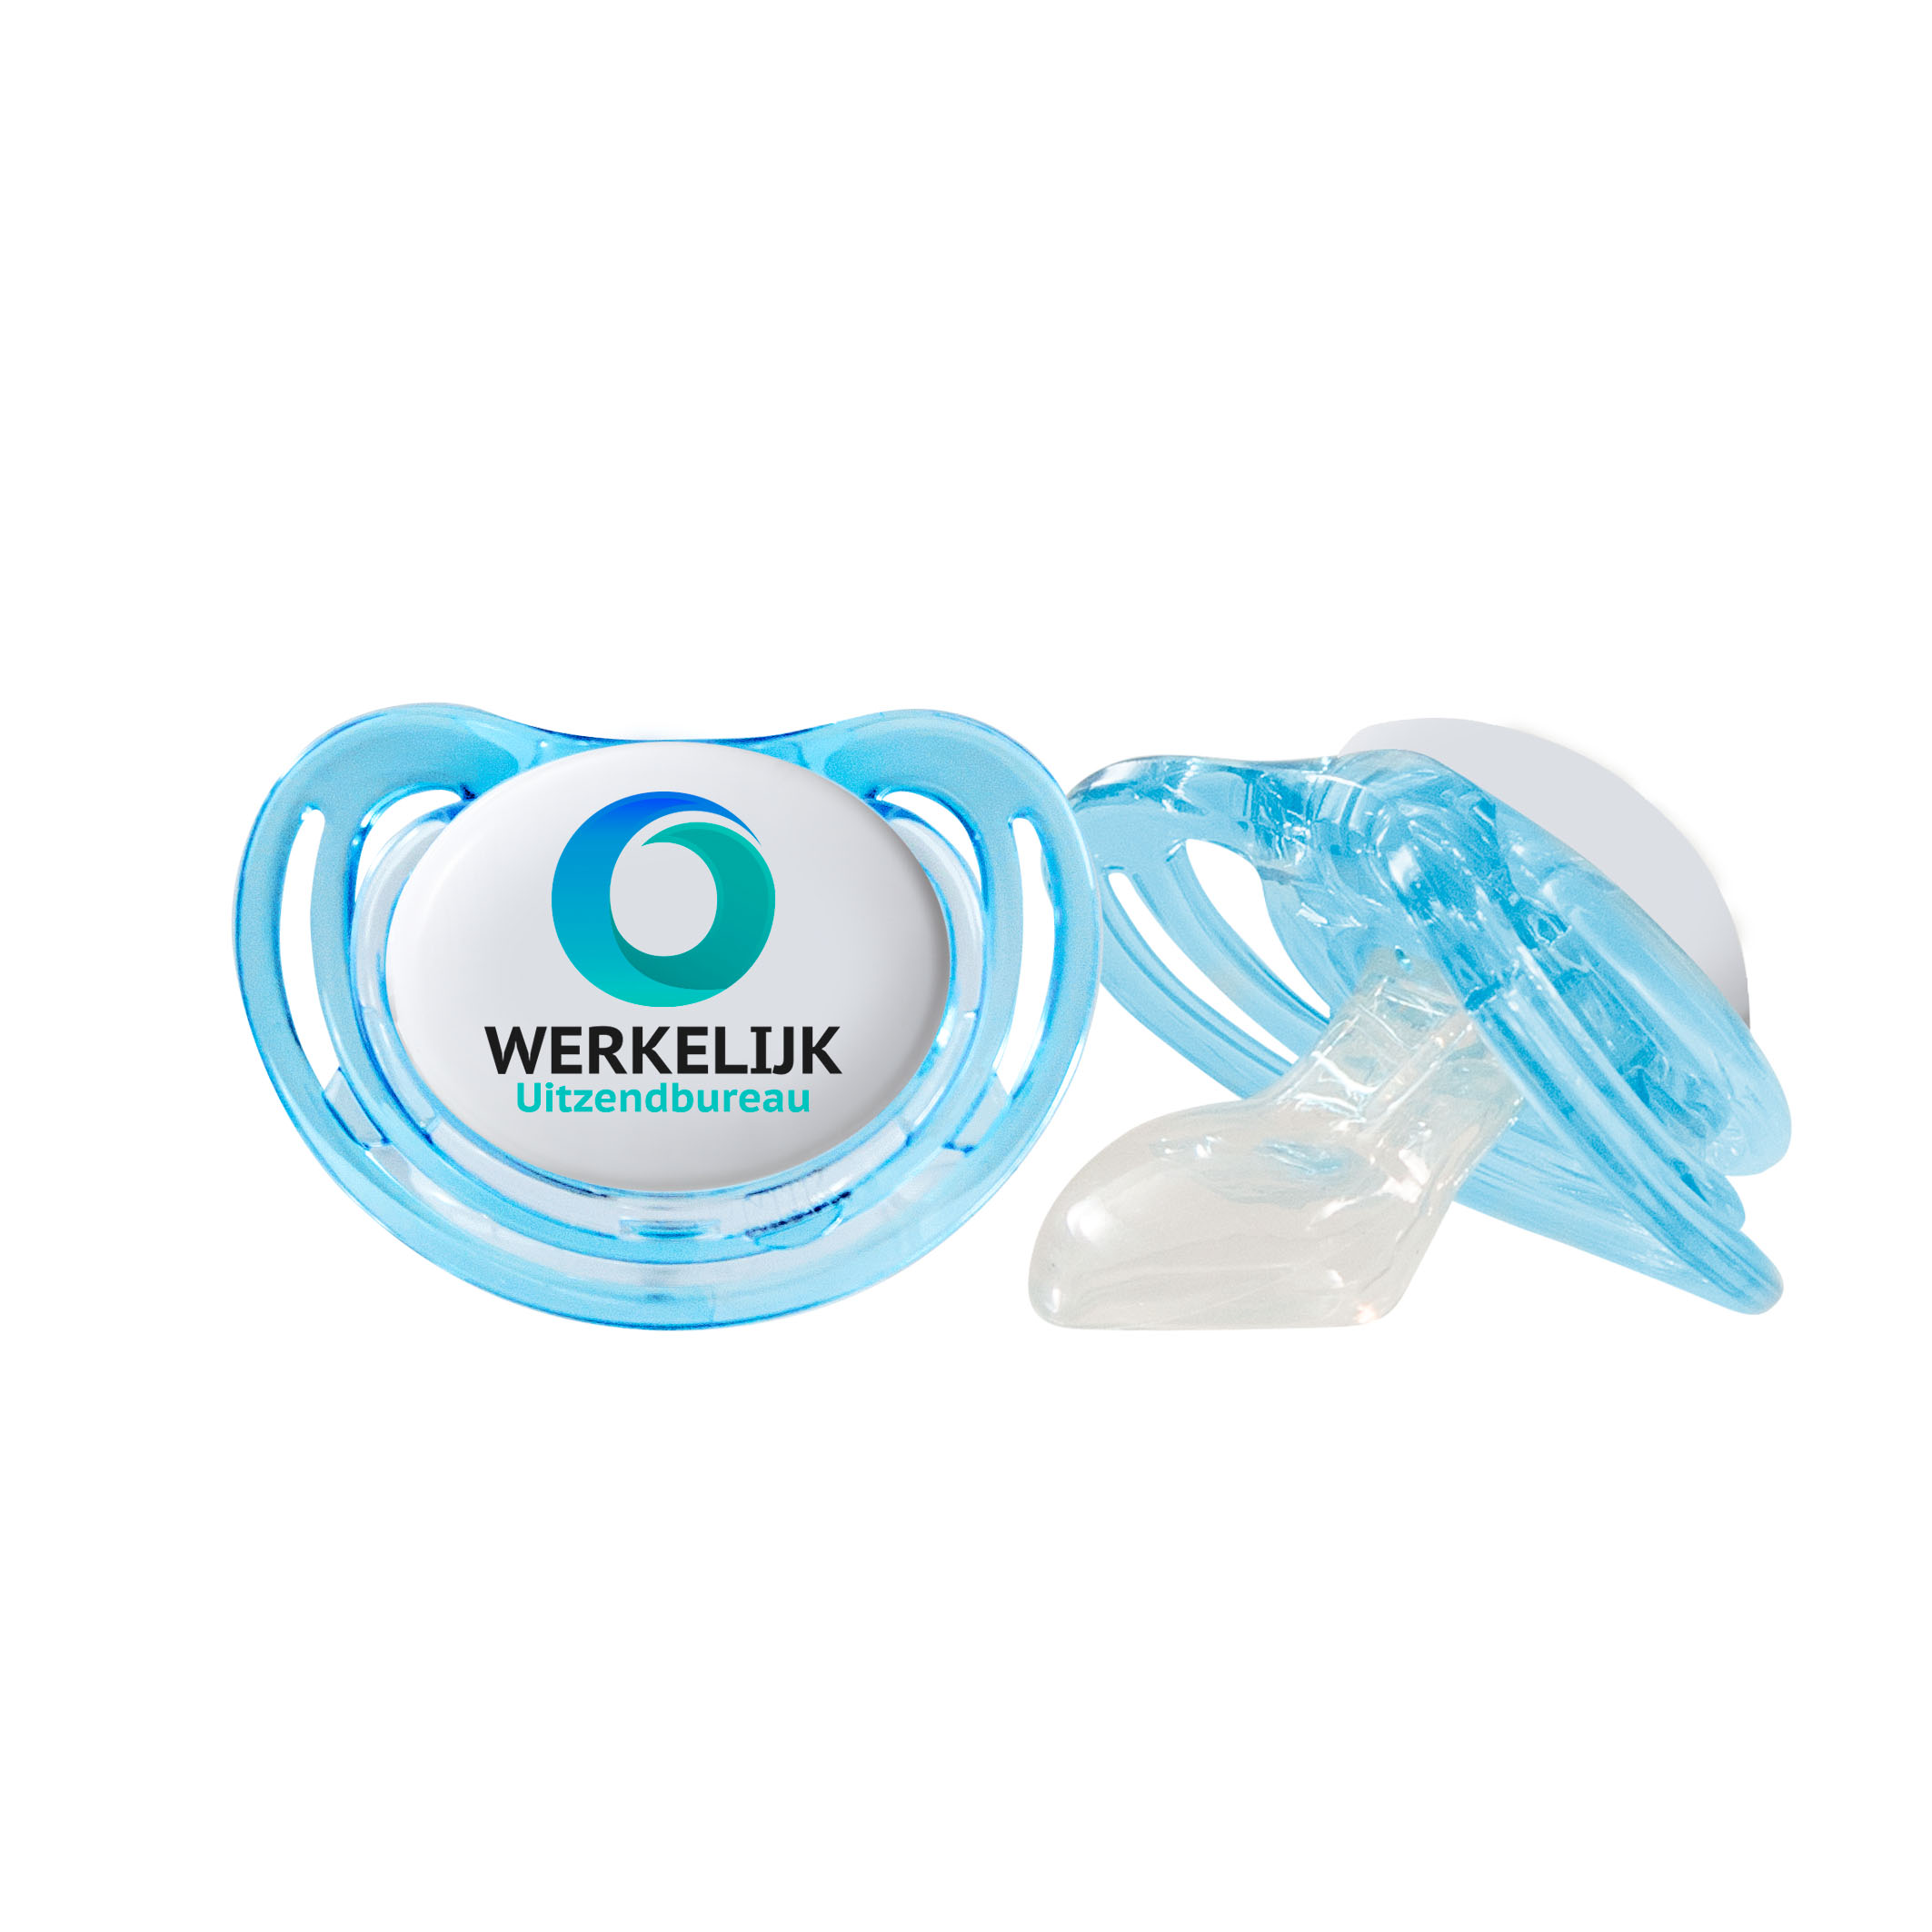 A silicone pacifier that is appropriate for children aged 0-6 months or 6-18 months. It comes in a simple, unmarked box. This pacifier is free of Bisphenol A (BPA) and has been certified to meet EN-1400 standards. The product is from Little Wymondley. - Kings Worthy